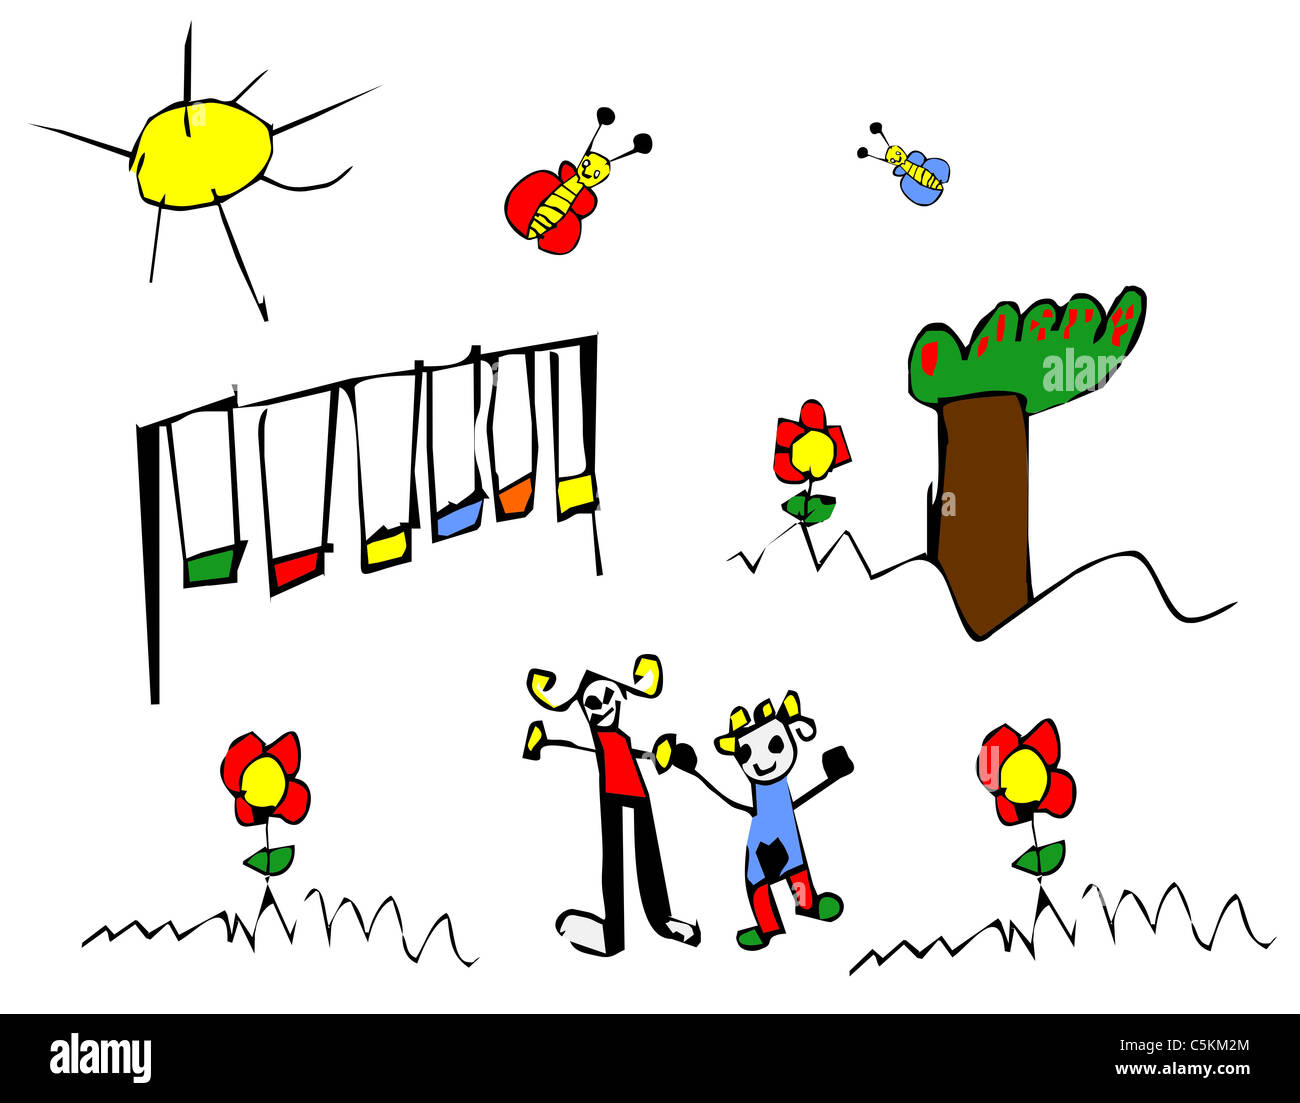 Child hand drawn illustration of children spring time outdoors activities. Stock Photo